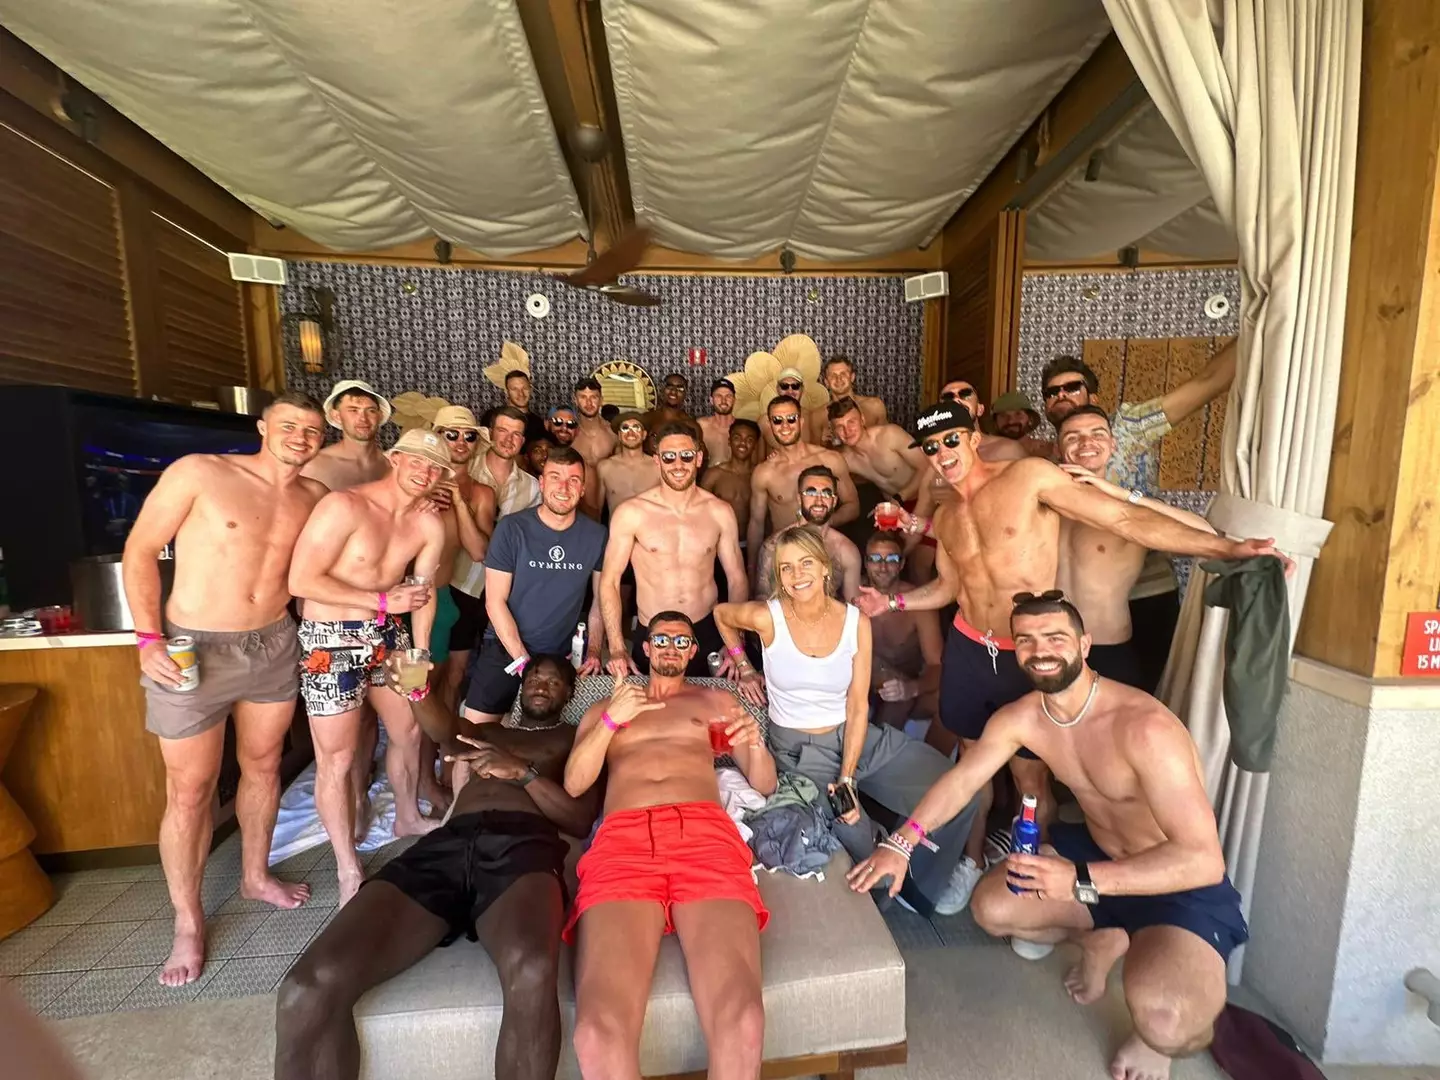 Rob McElhenney (second right in the cap) has show up Wrexham players after looking more ripped than any of them during the Las Vegas pool party.